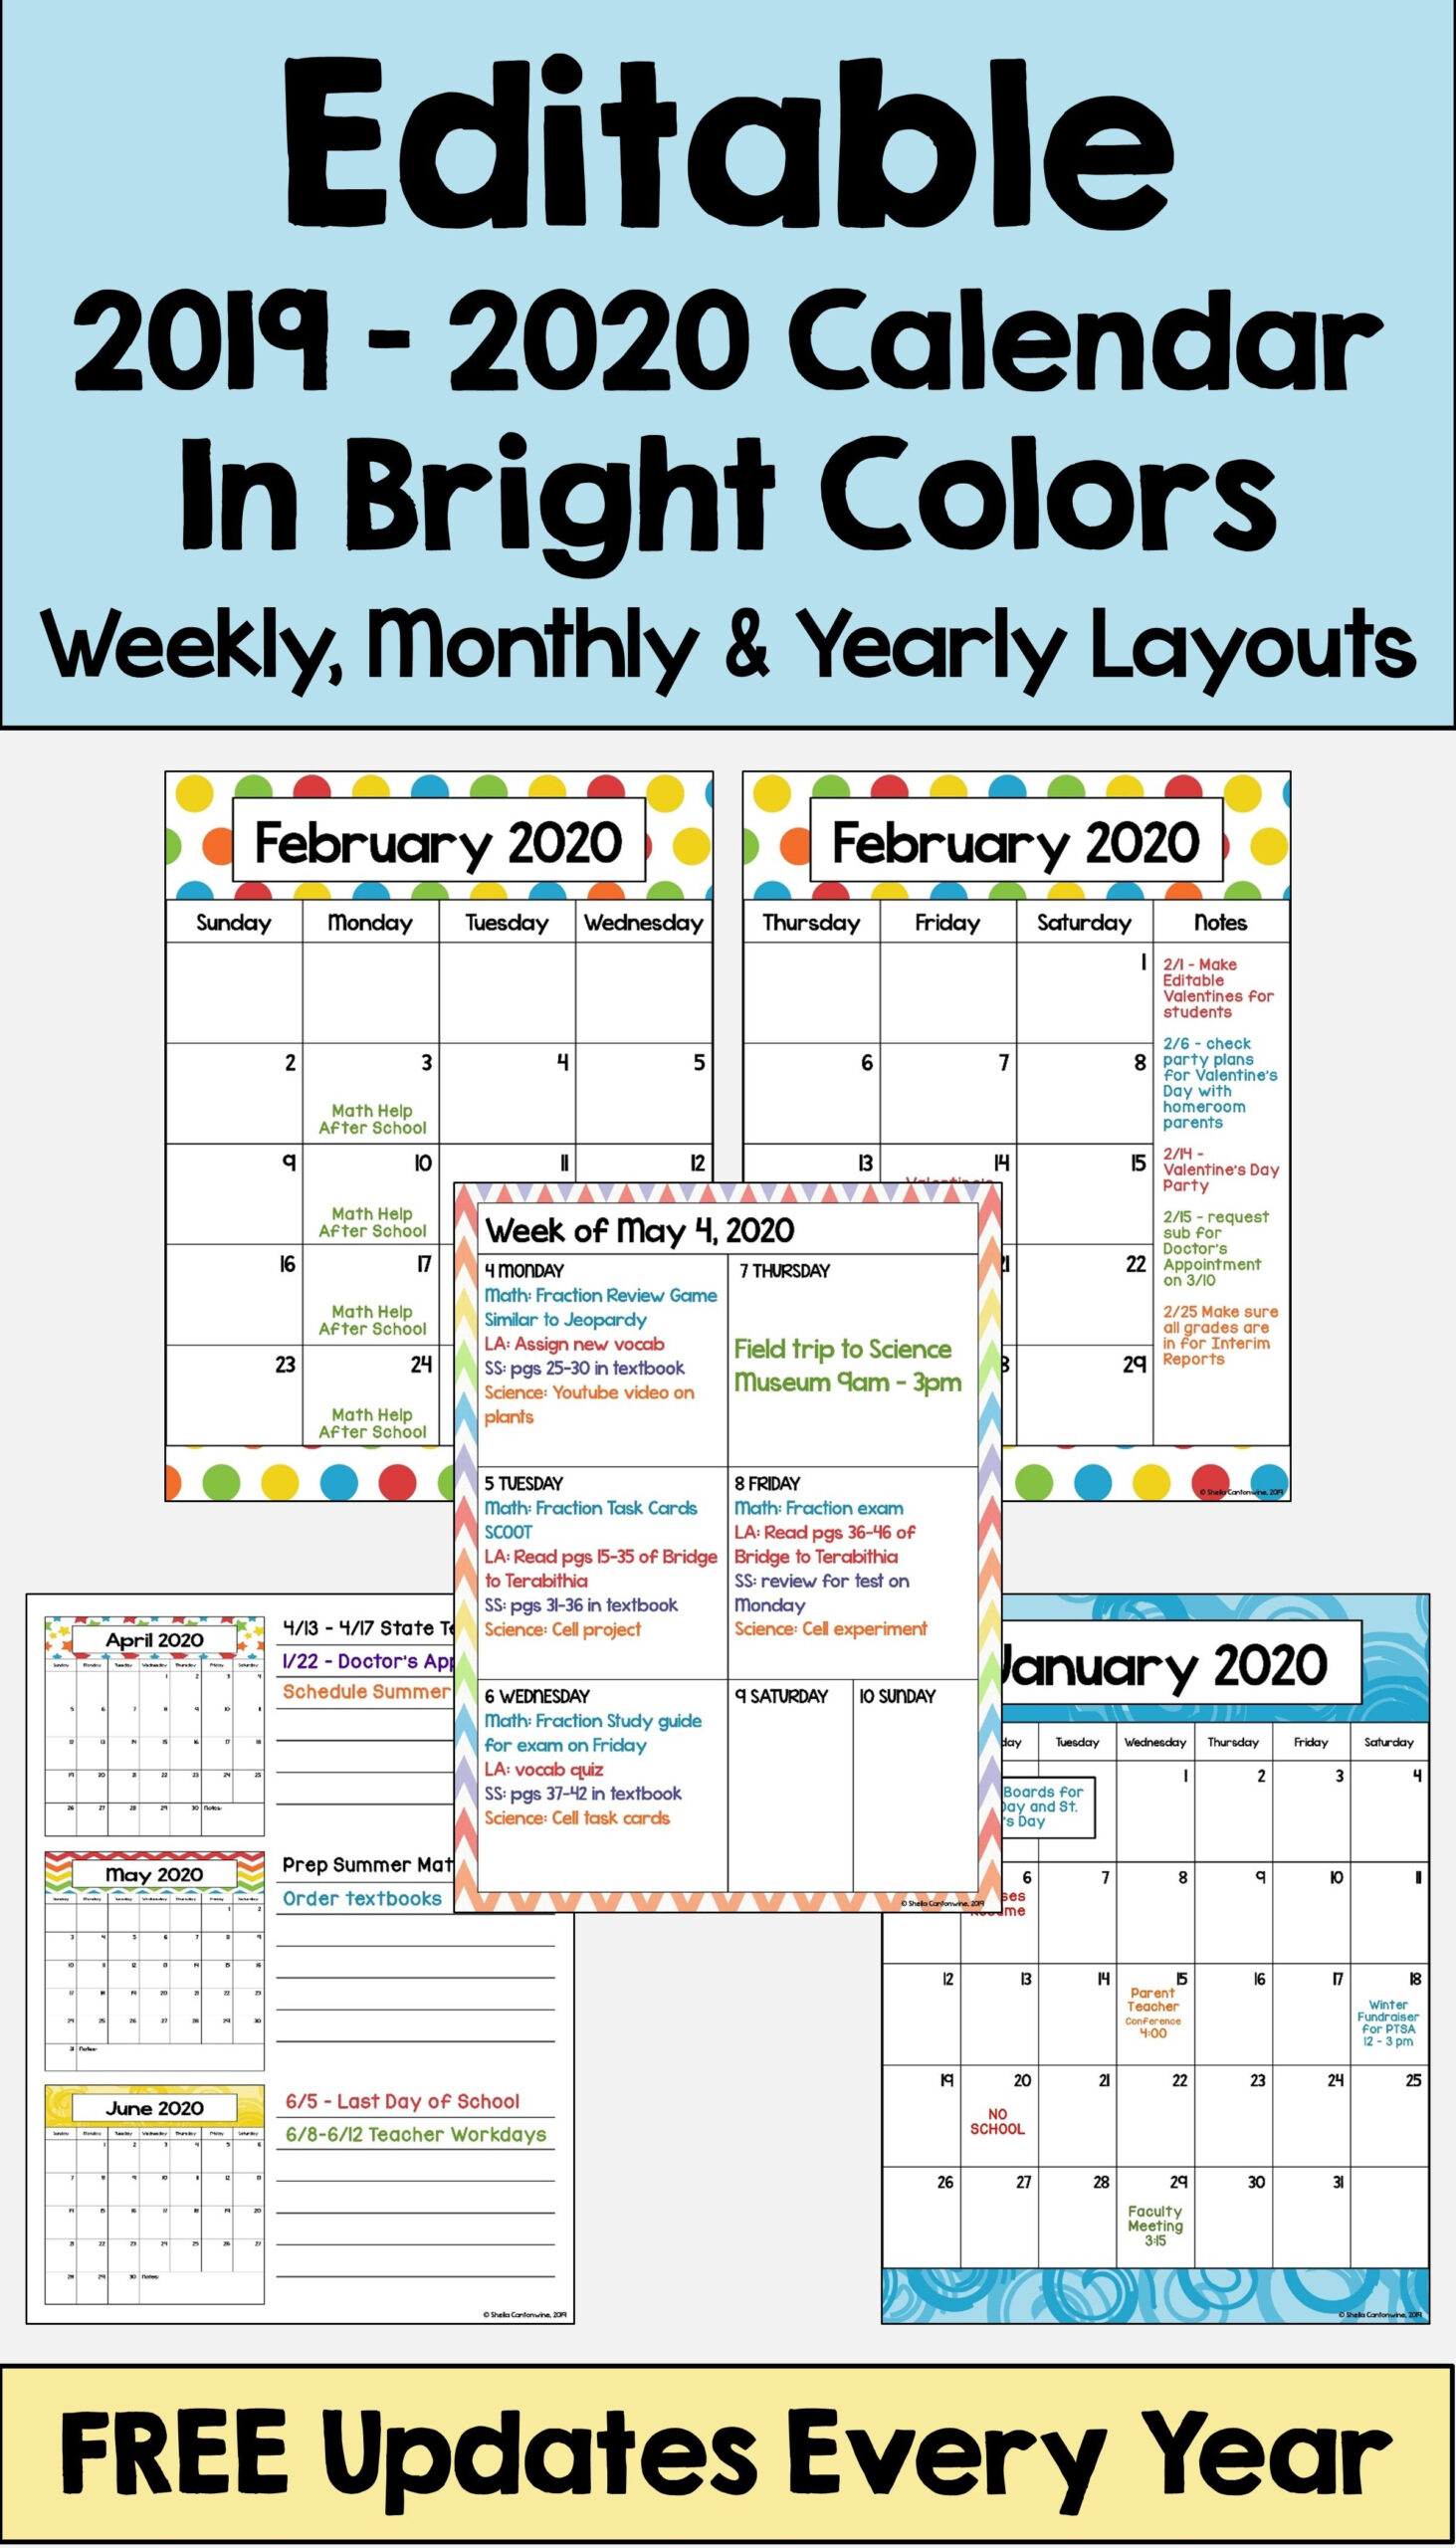 2019-2020 Editable Calendar With Bright Colors And Free